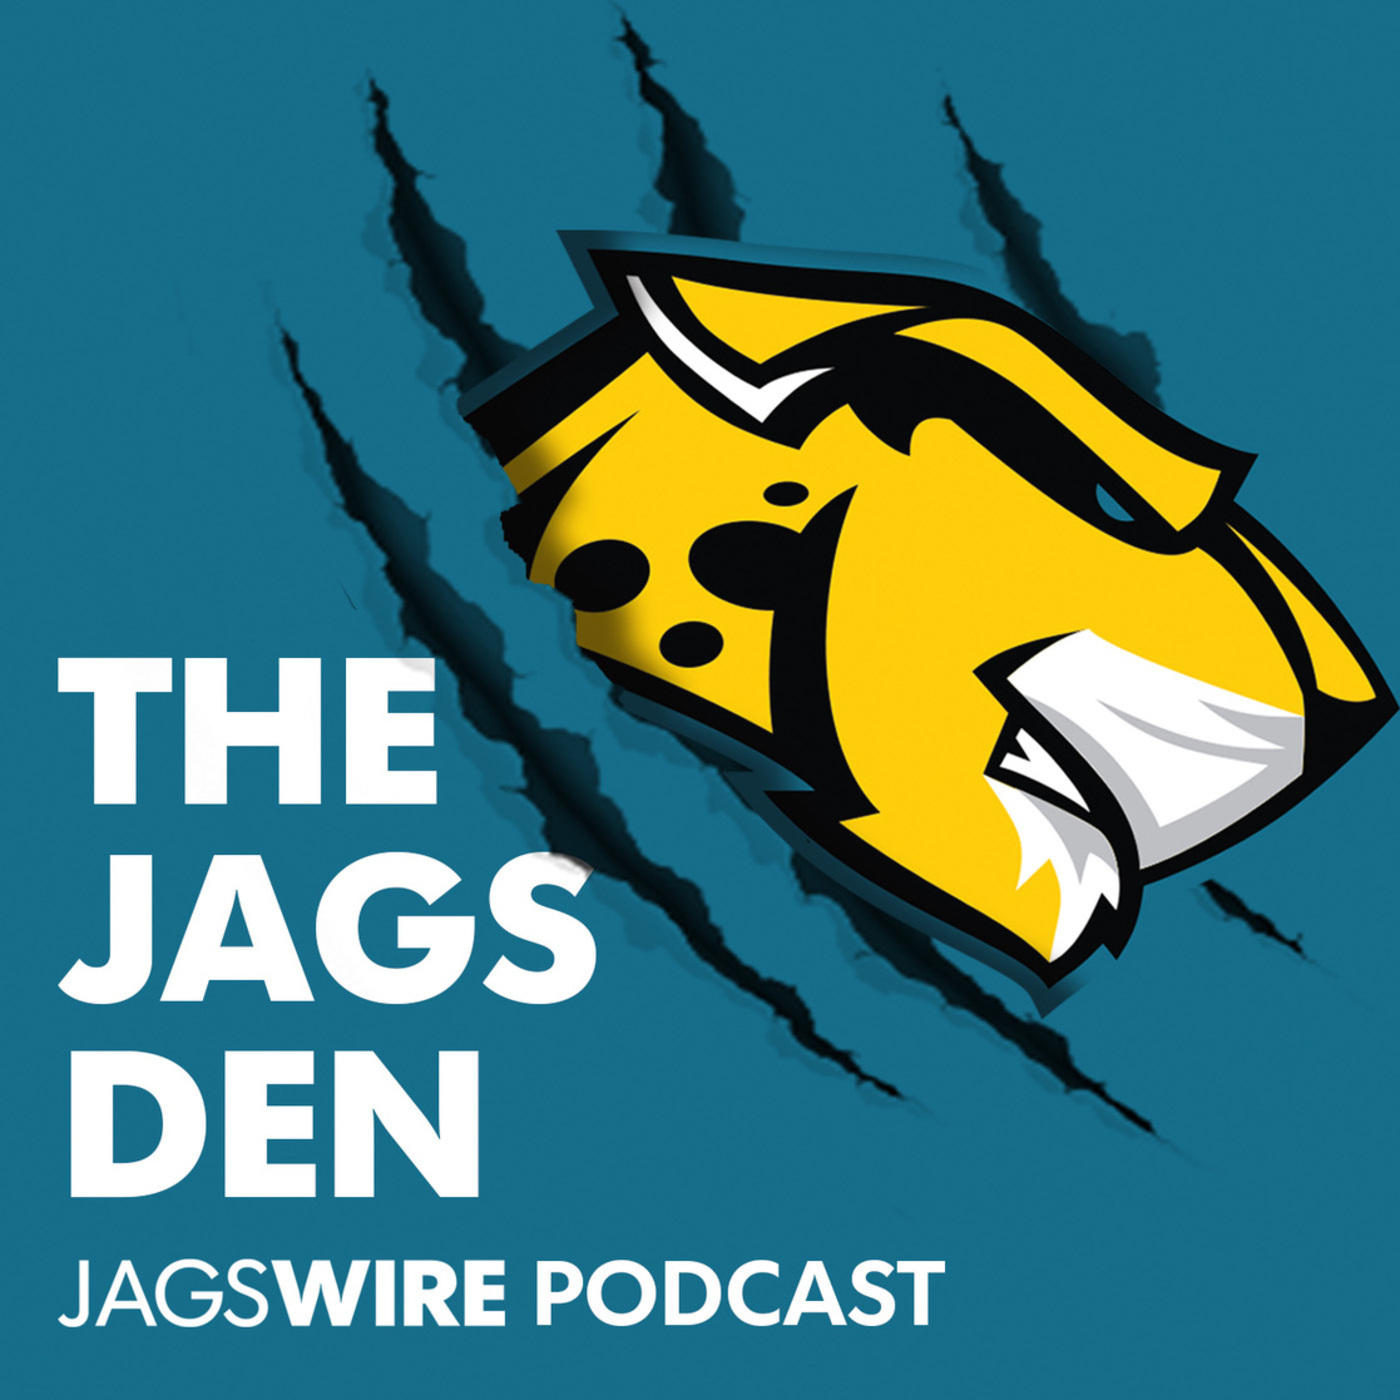 Jags Den Podcast Ep. 13: Jags vs. Chargers recap, discussions on a Jags-Pats postseason game and chat with NFL insider Ian Rapoport